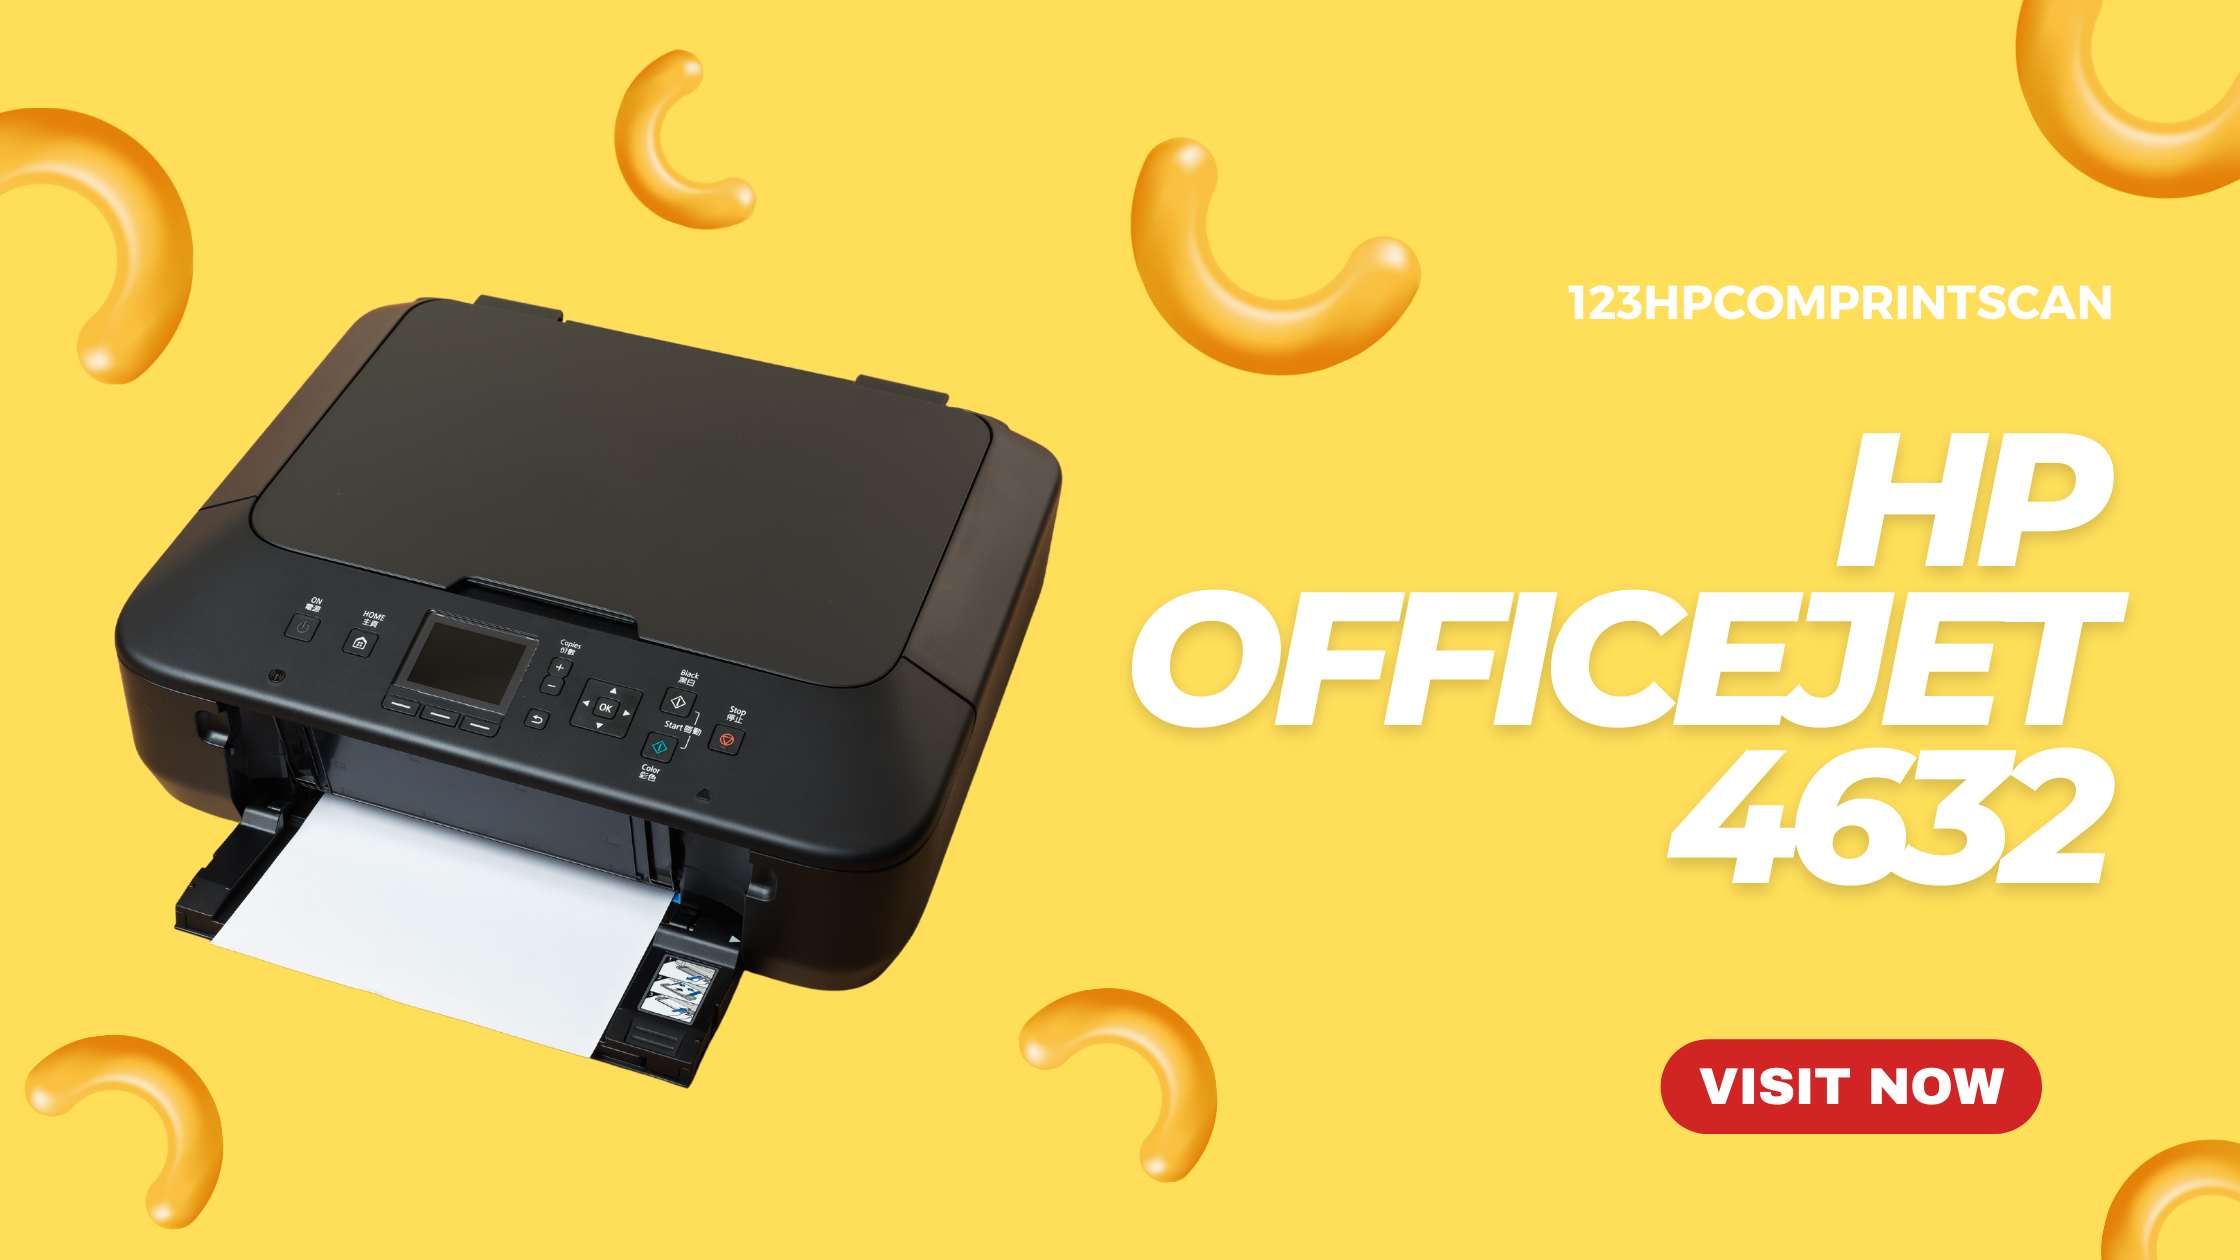 How is the wifi HP Officejet 4632 configuration connected?